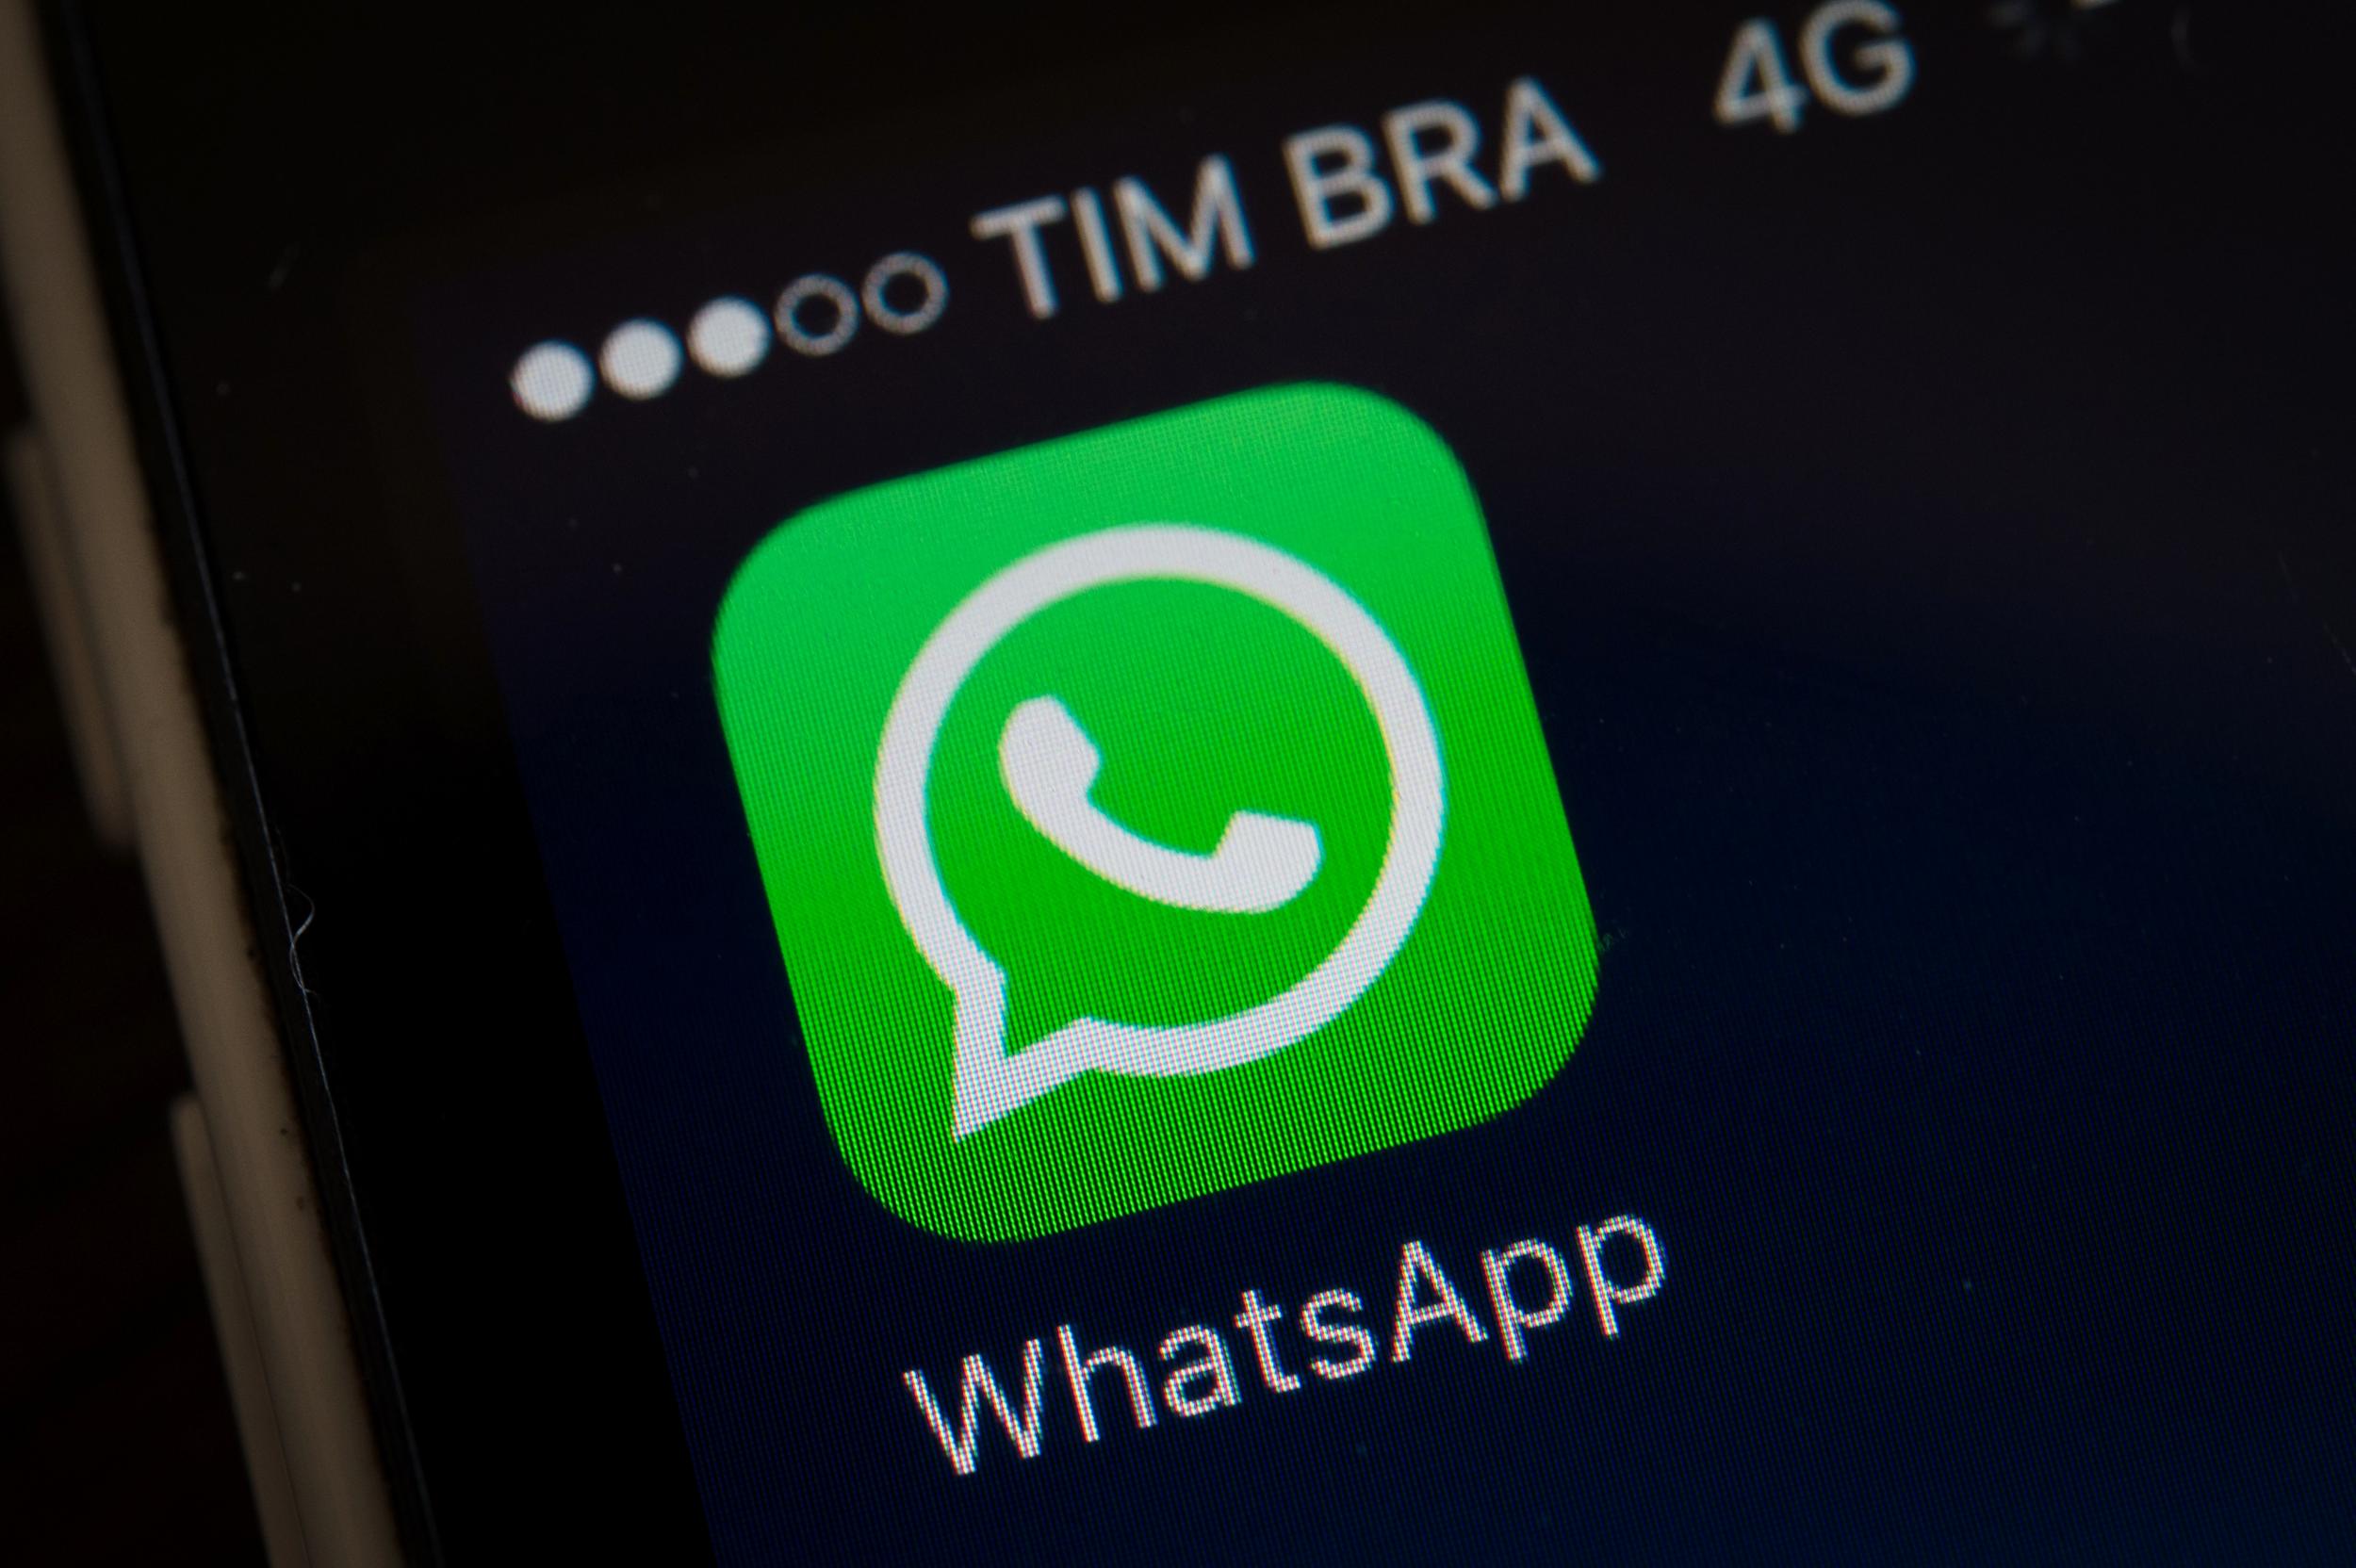 The arrest related to WhatsApp's alleged refusal to hand over private user data